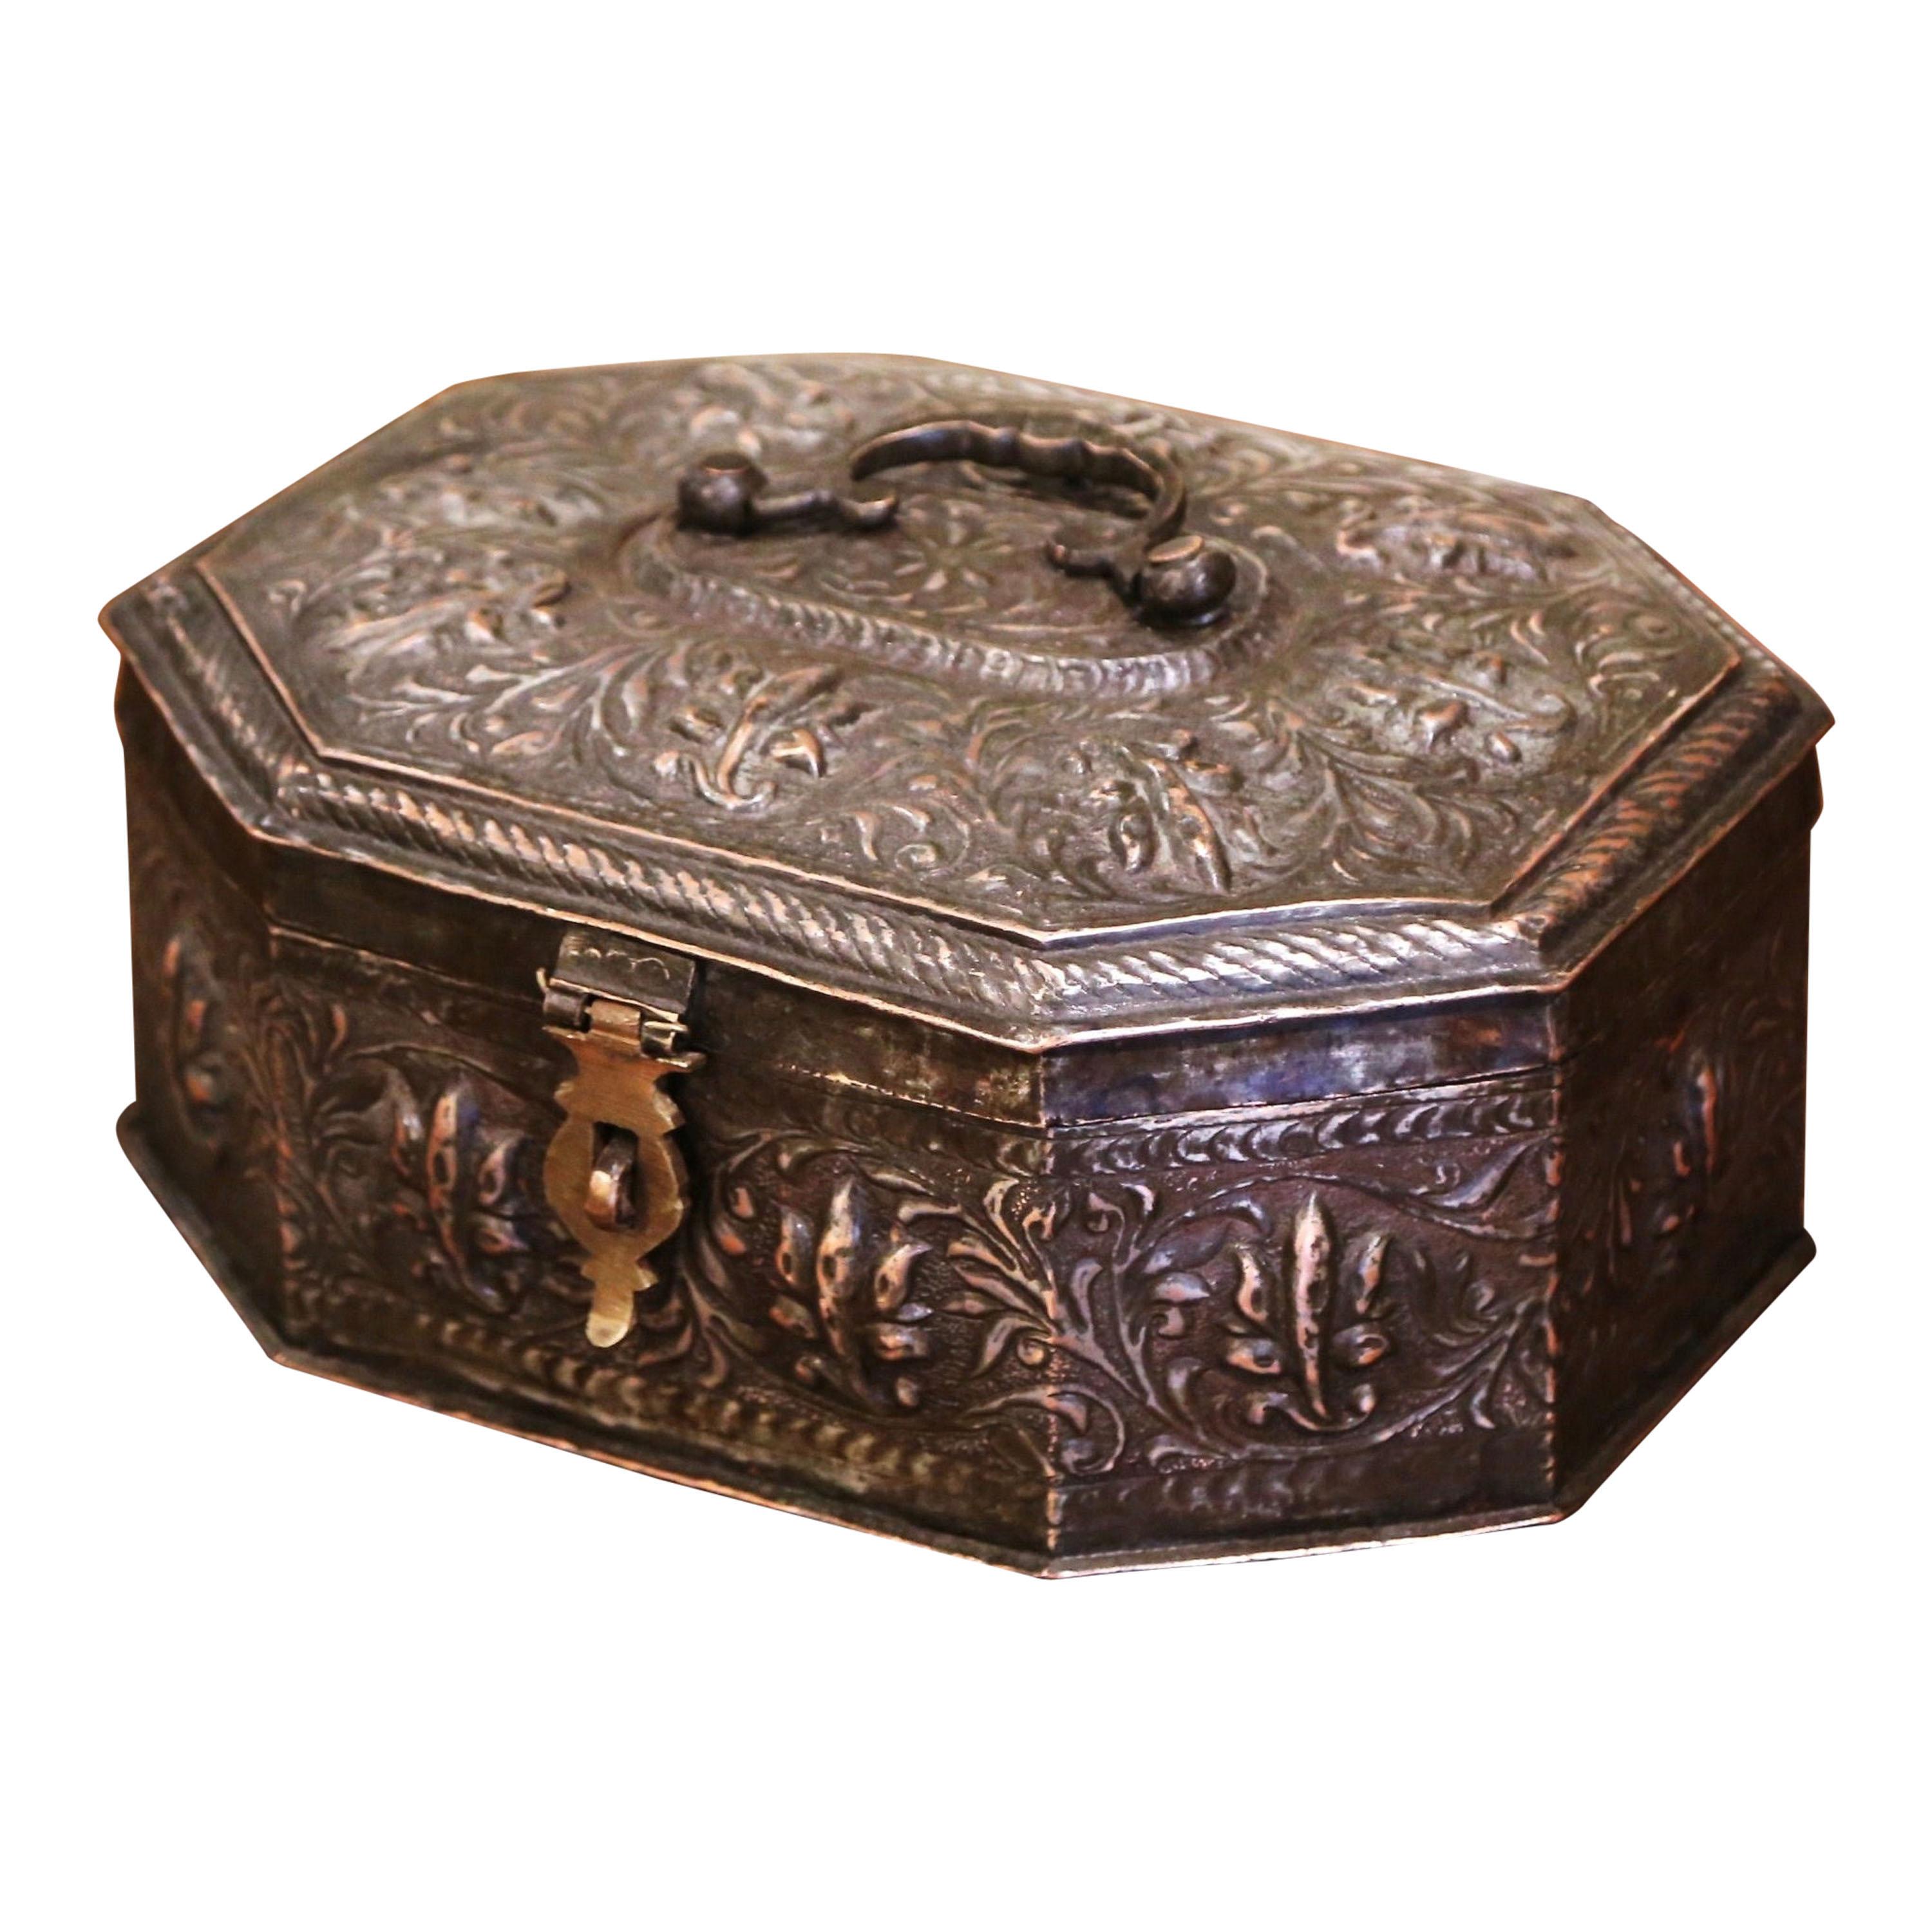 19th Century French Repousse Silvered Metal Spice or Jewelry Box